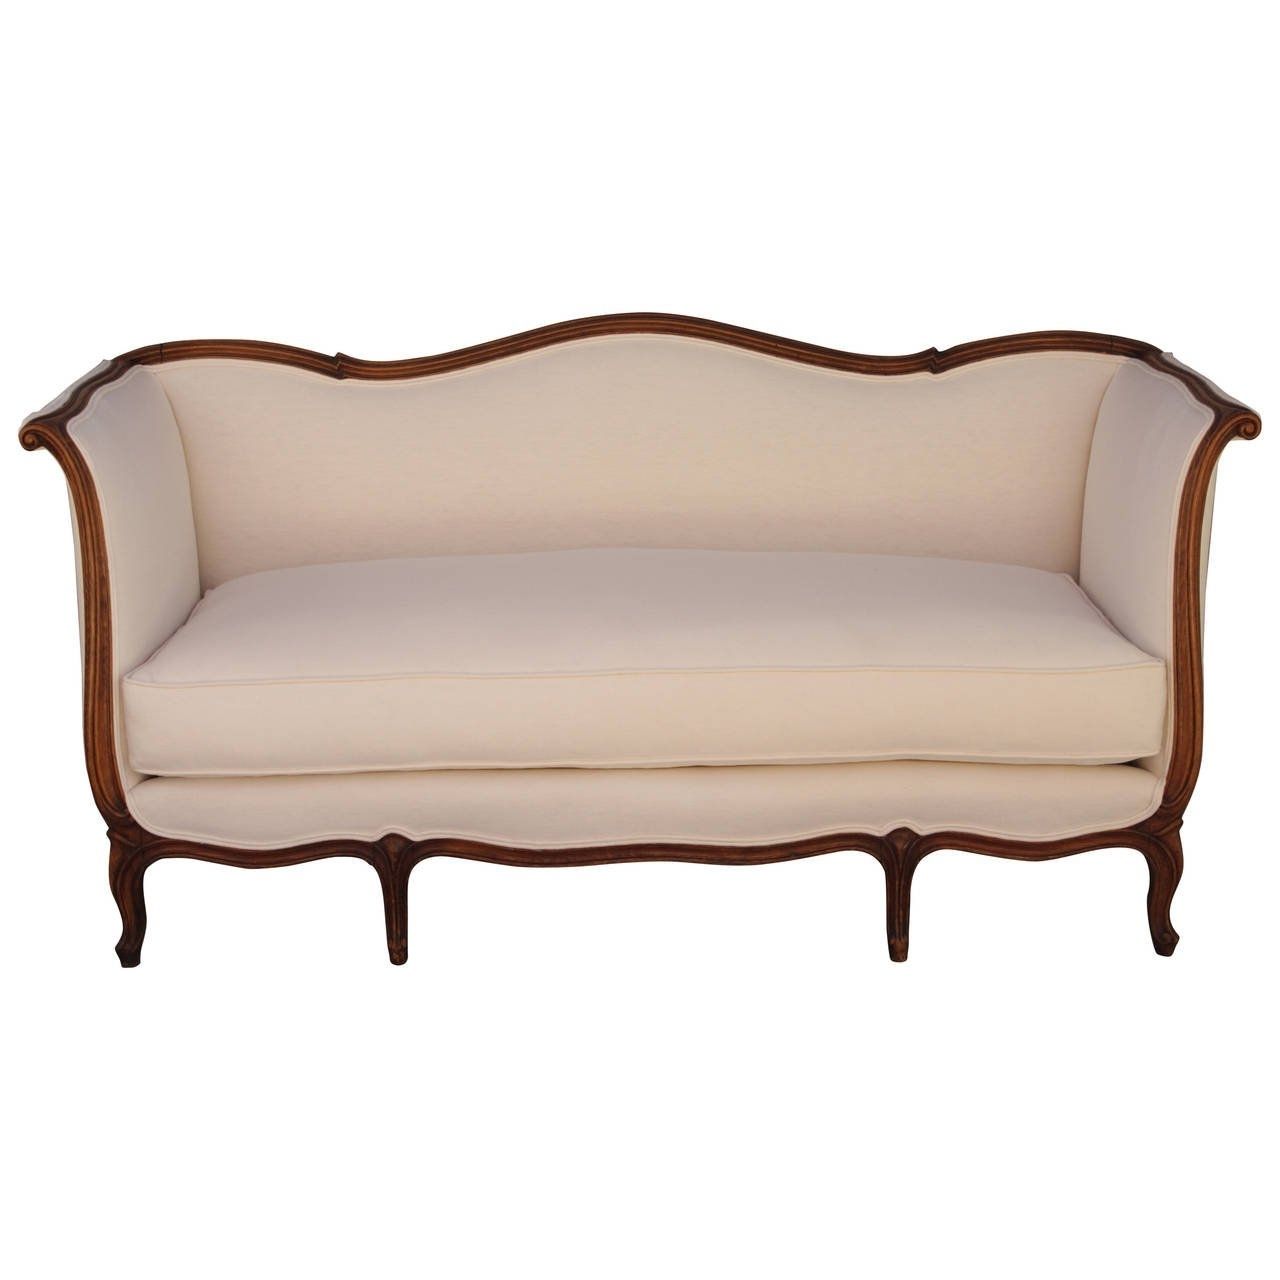 French Louis Xv Style Sofa With Linen Upholstery At 1stdibs Regarding Widely Used French Style Sofas (View 5 of 15)